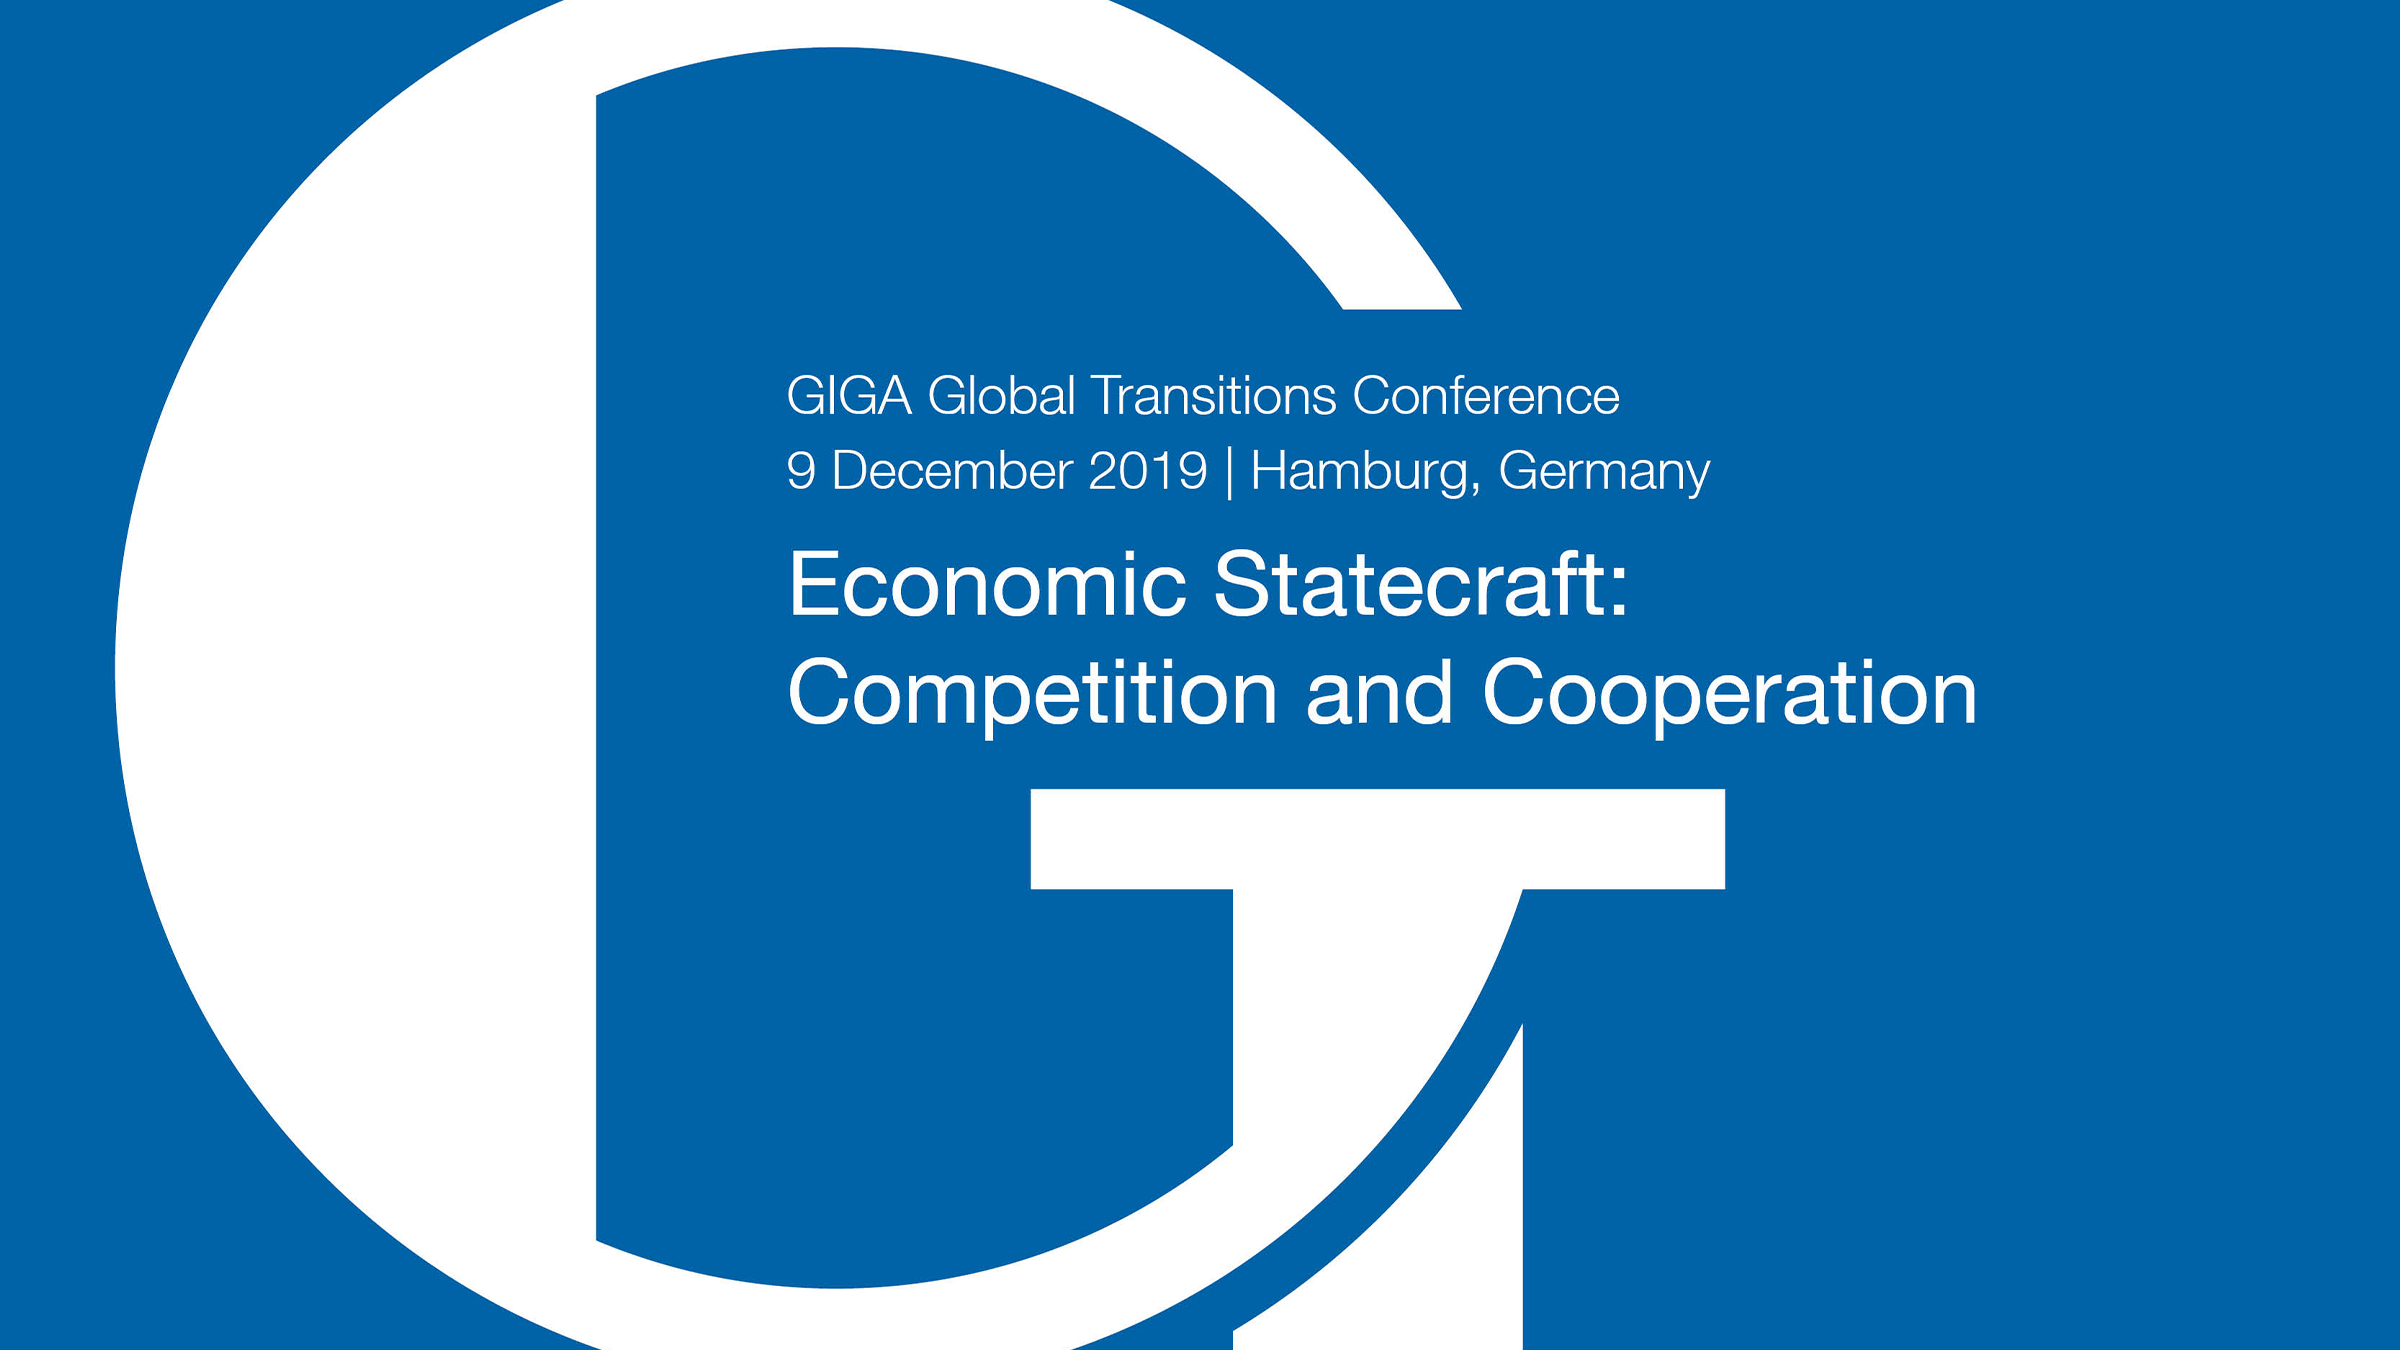 Economic Statecraft: Competition and Cooperation